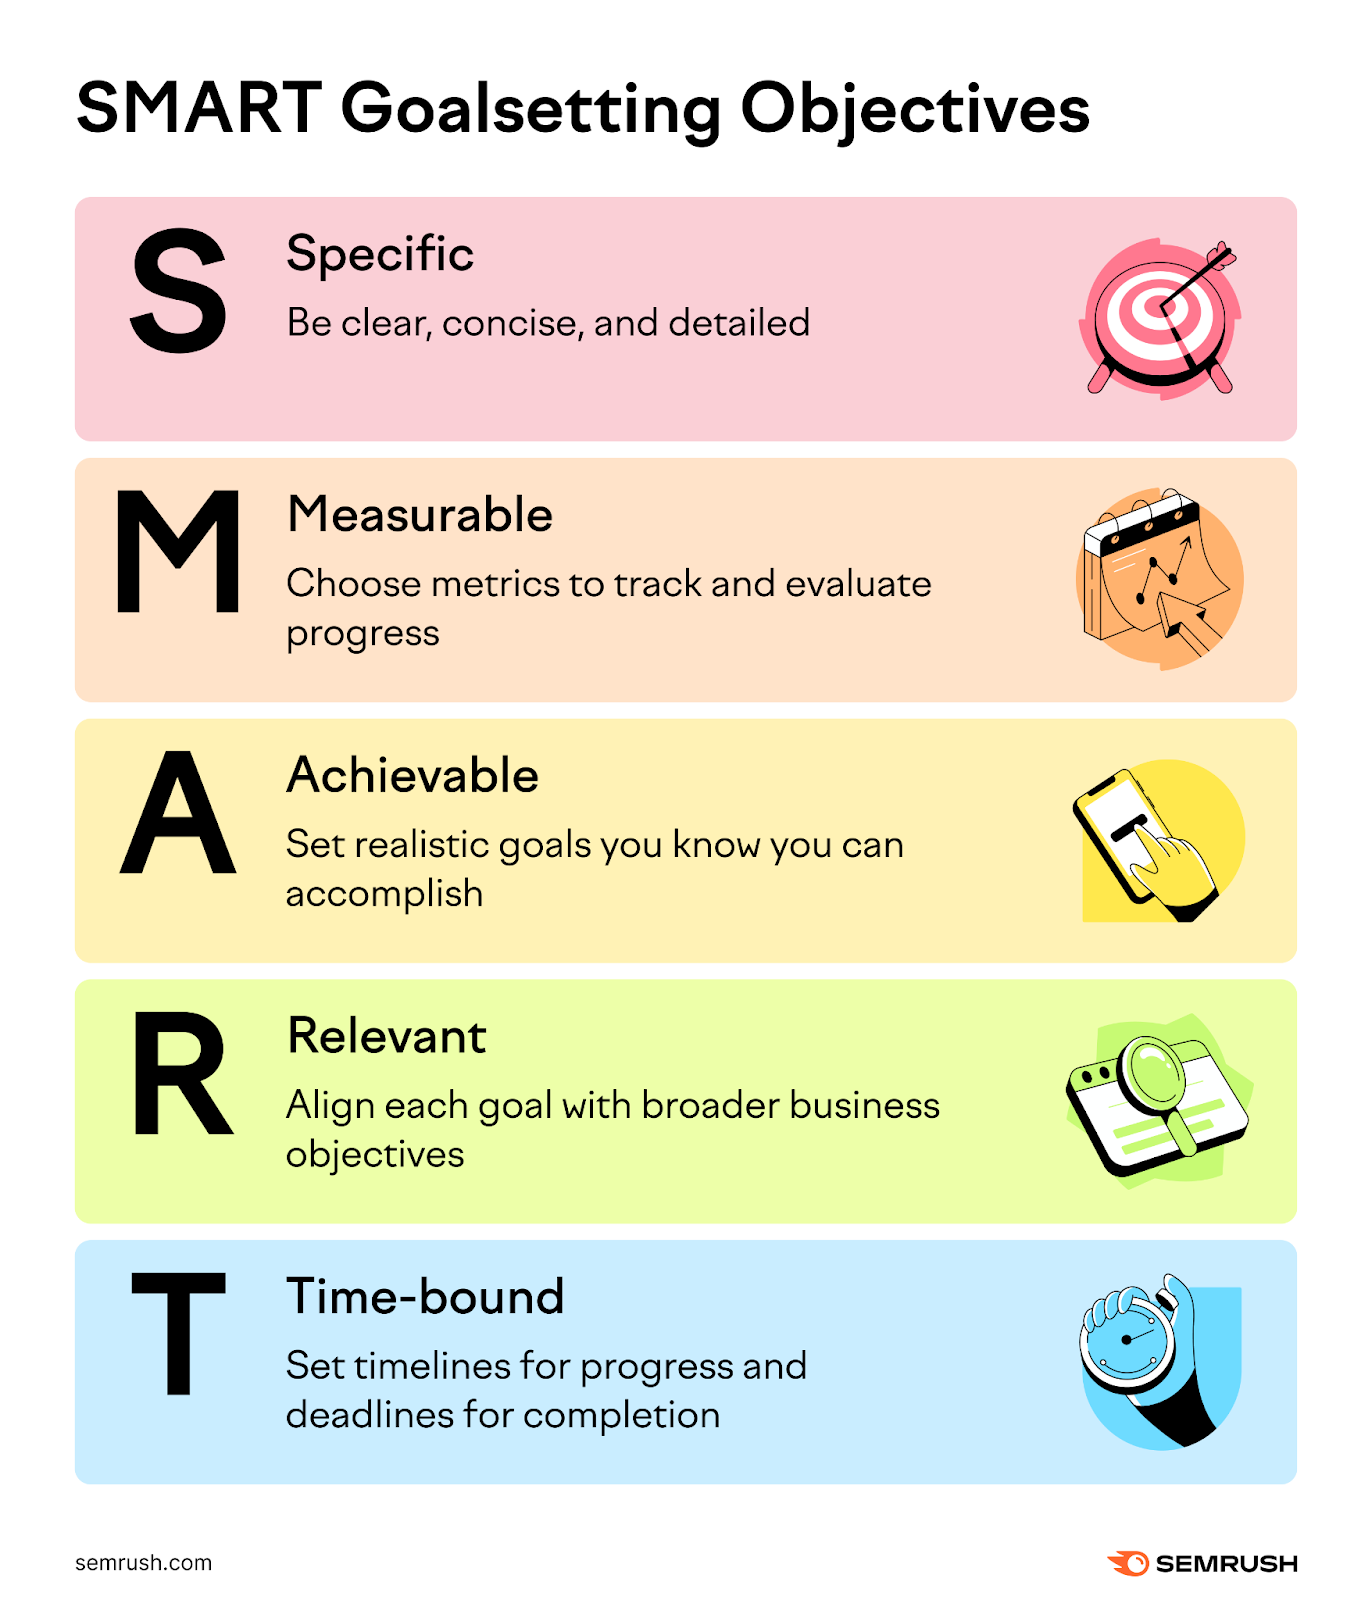 SMART goals are specific, measurable, achievable, relevant, and time-bound.